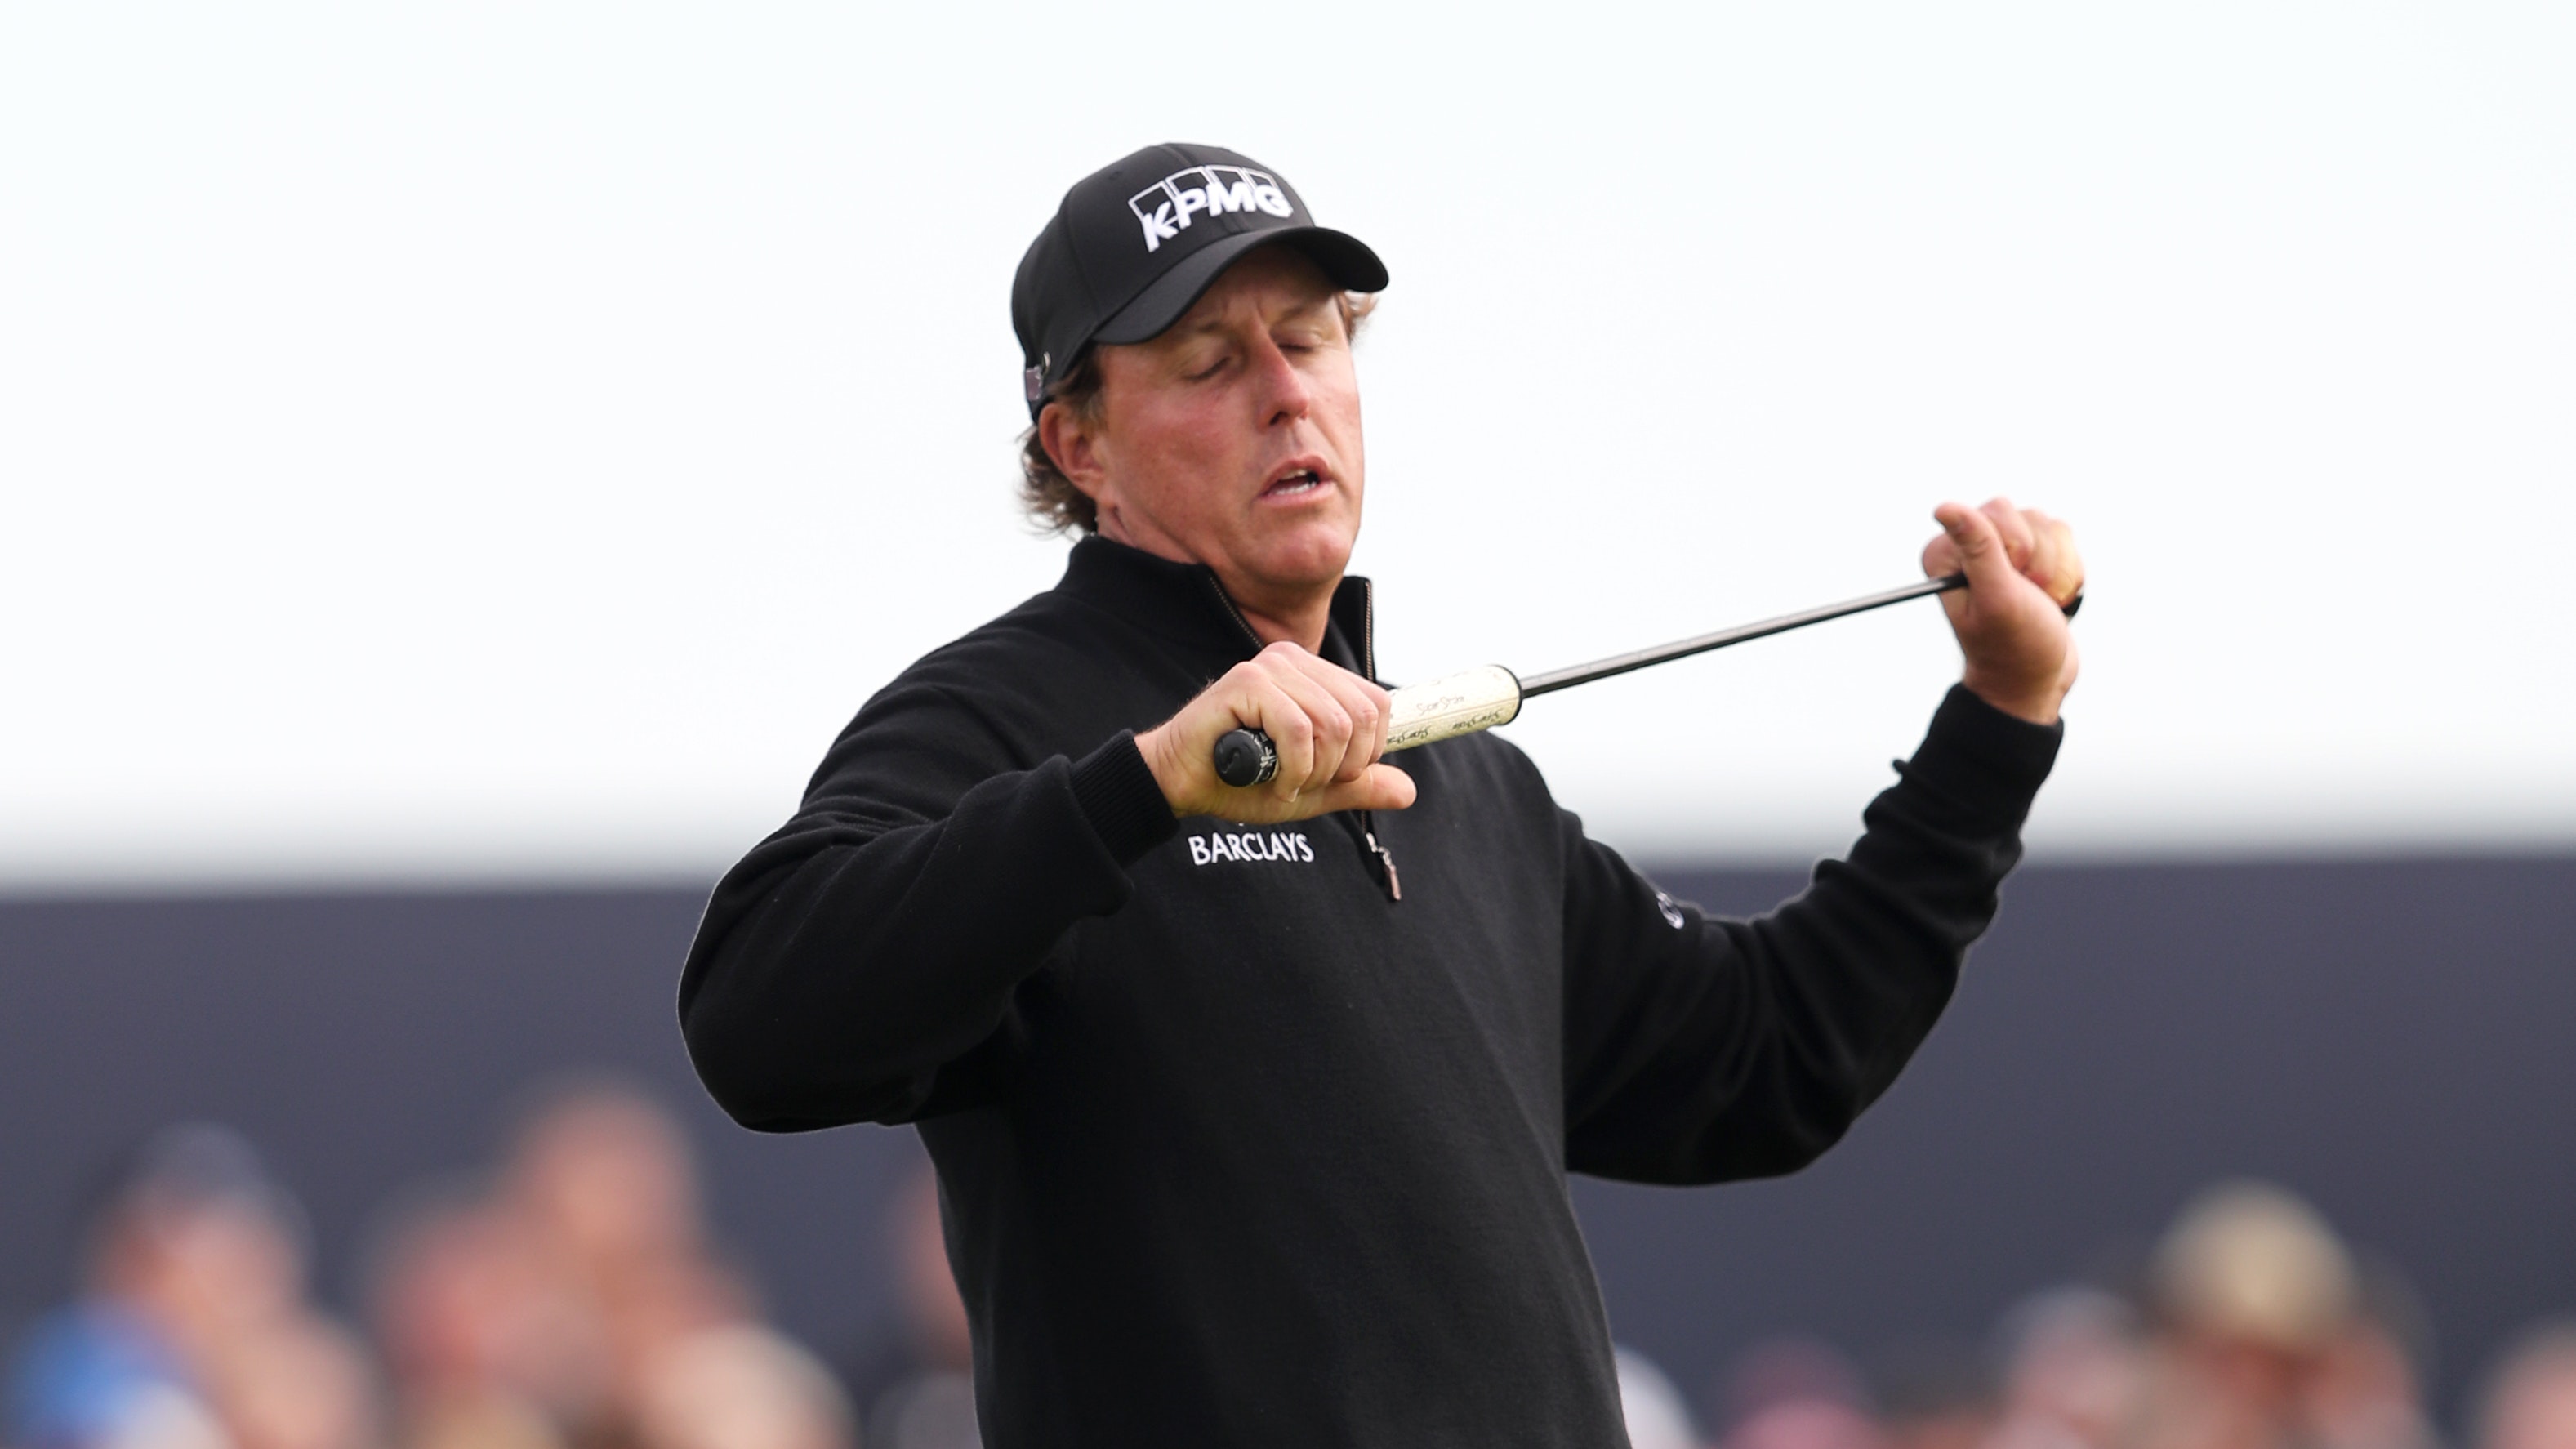 Phil Mickelson reveals fatigue, plans to dramatically cut schedule